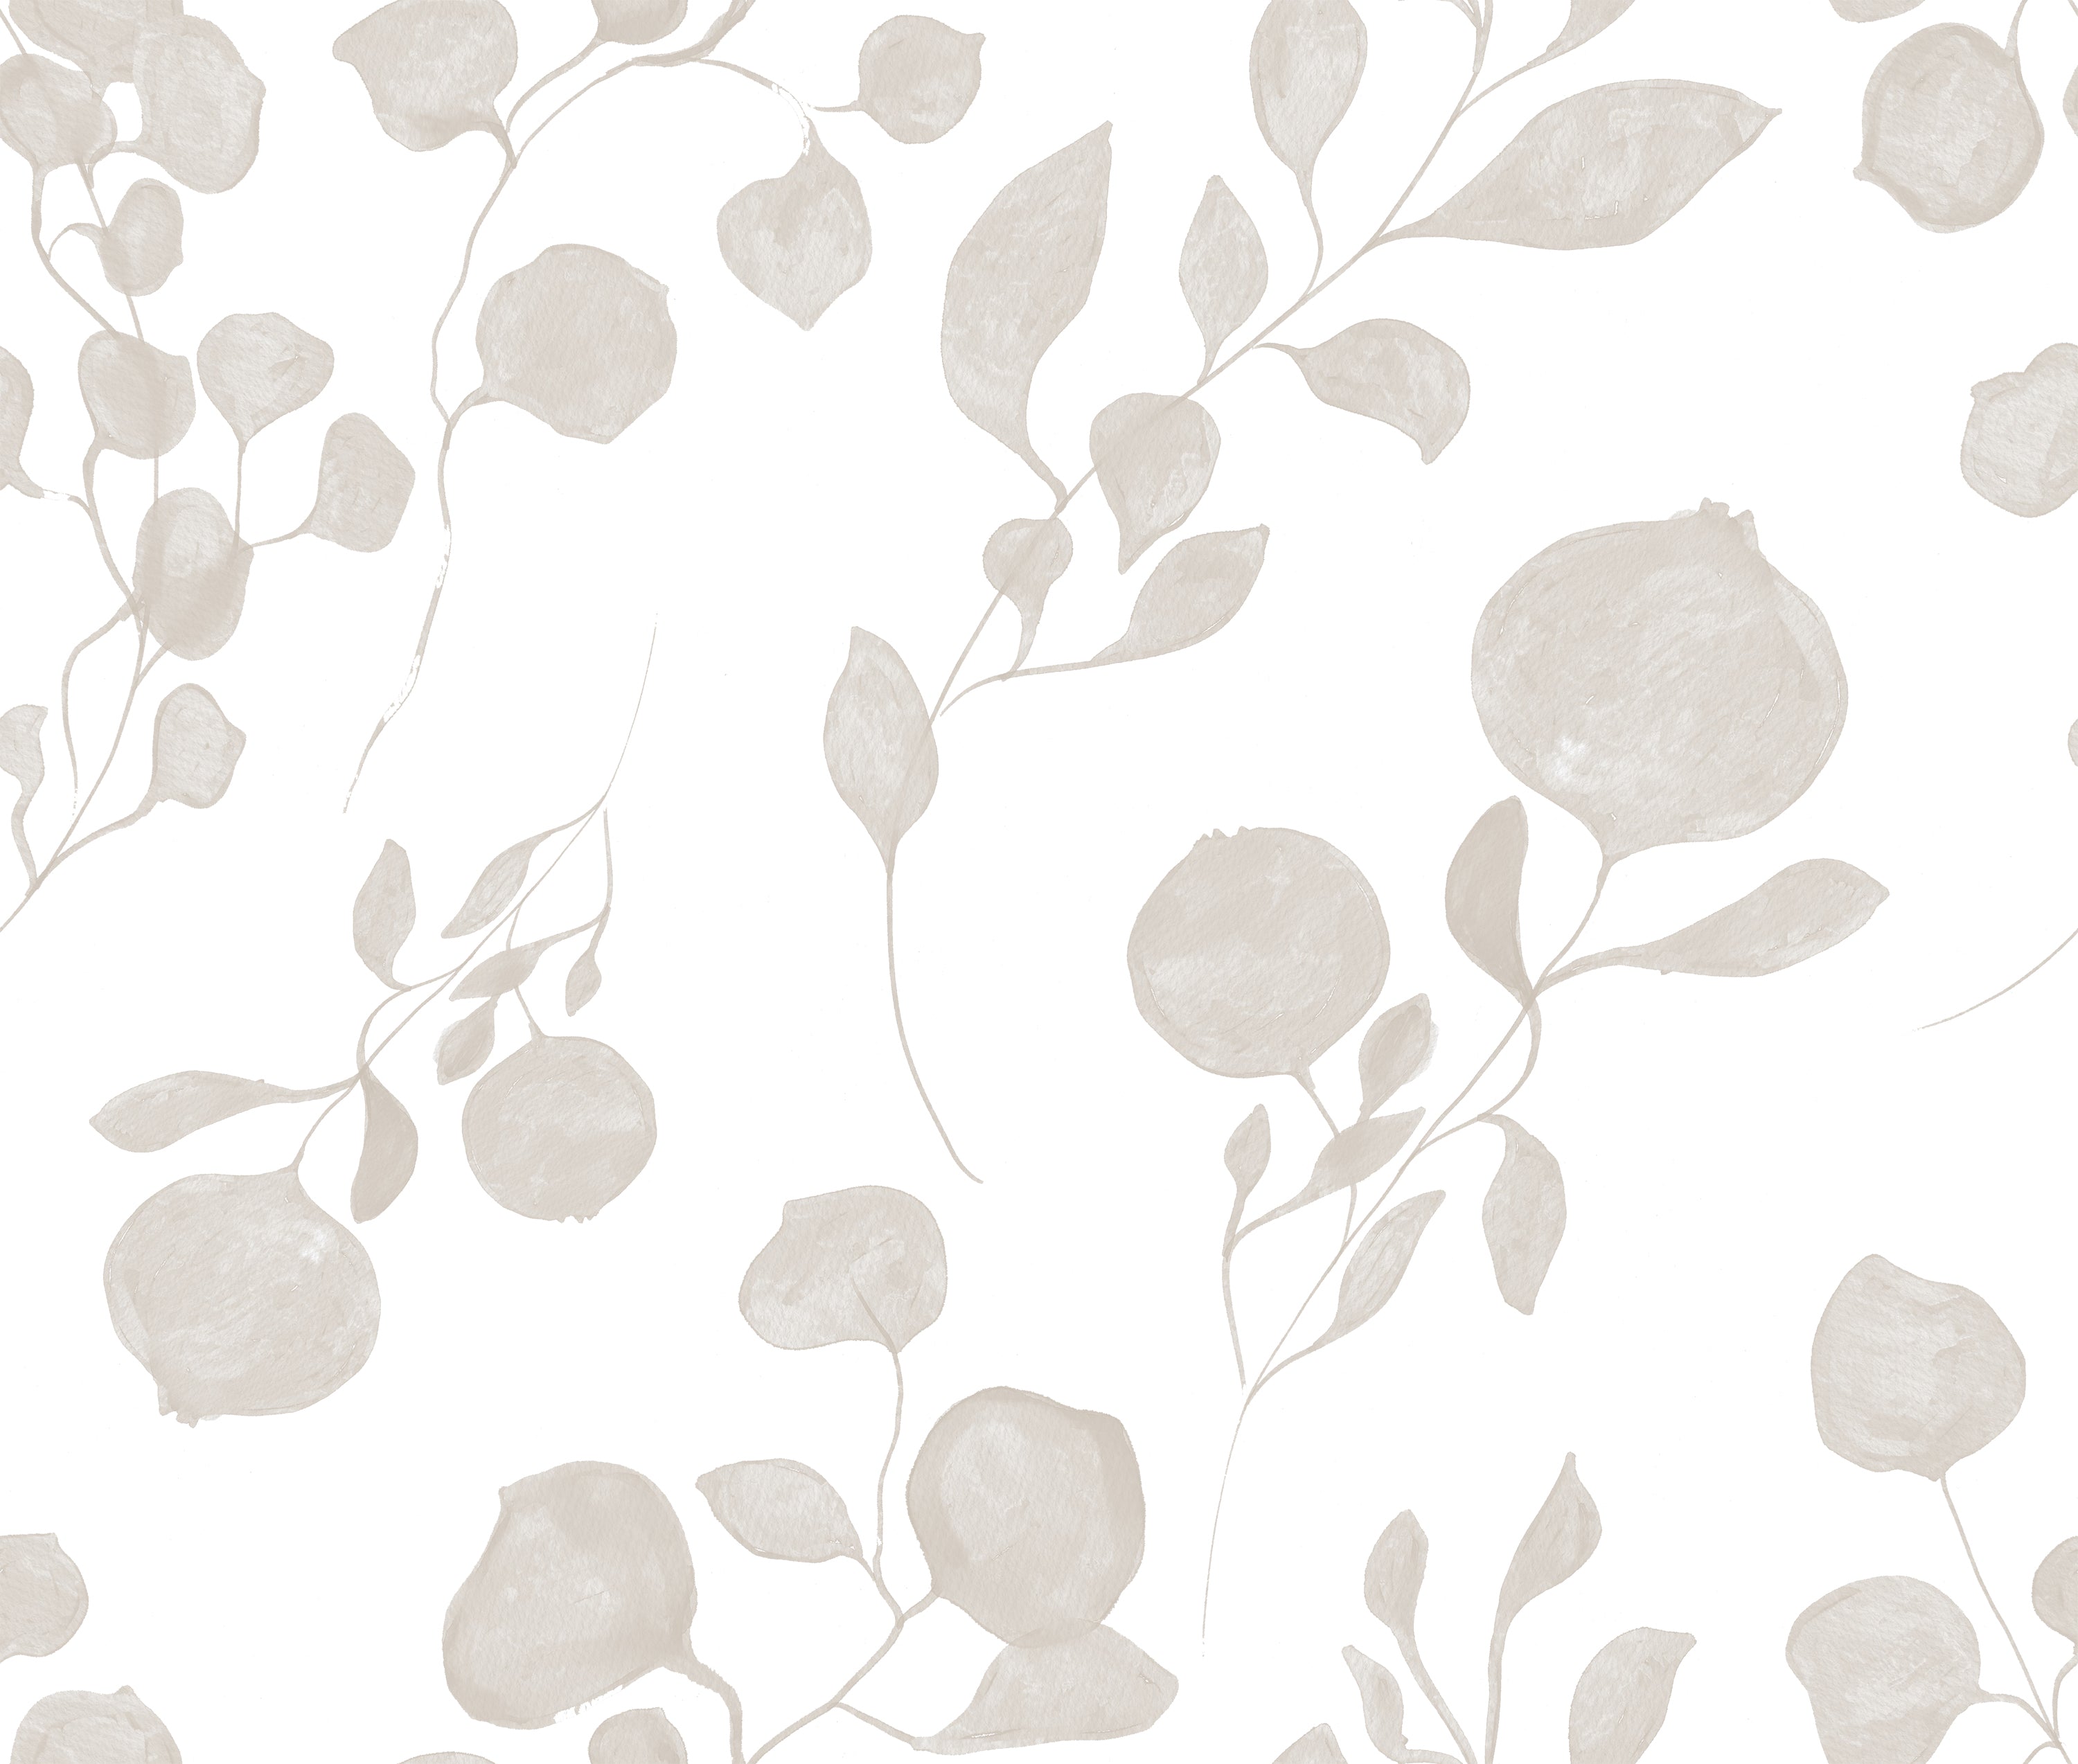 A close-up view of the "Atelier Botanique Wallpaper," which depicts a delicate array of sketched botanicals in grey on a soft white background. The pattern adds a gentle and artistic touch to any room, perfect for spaces that embrace a calm and neutral palette.